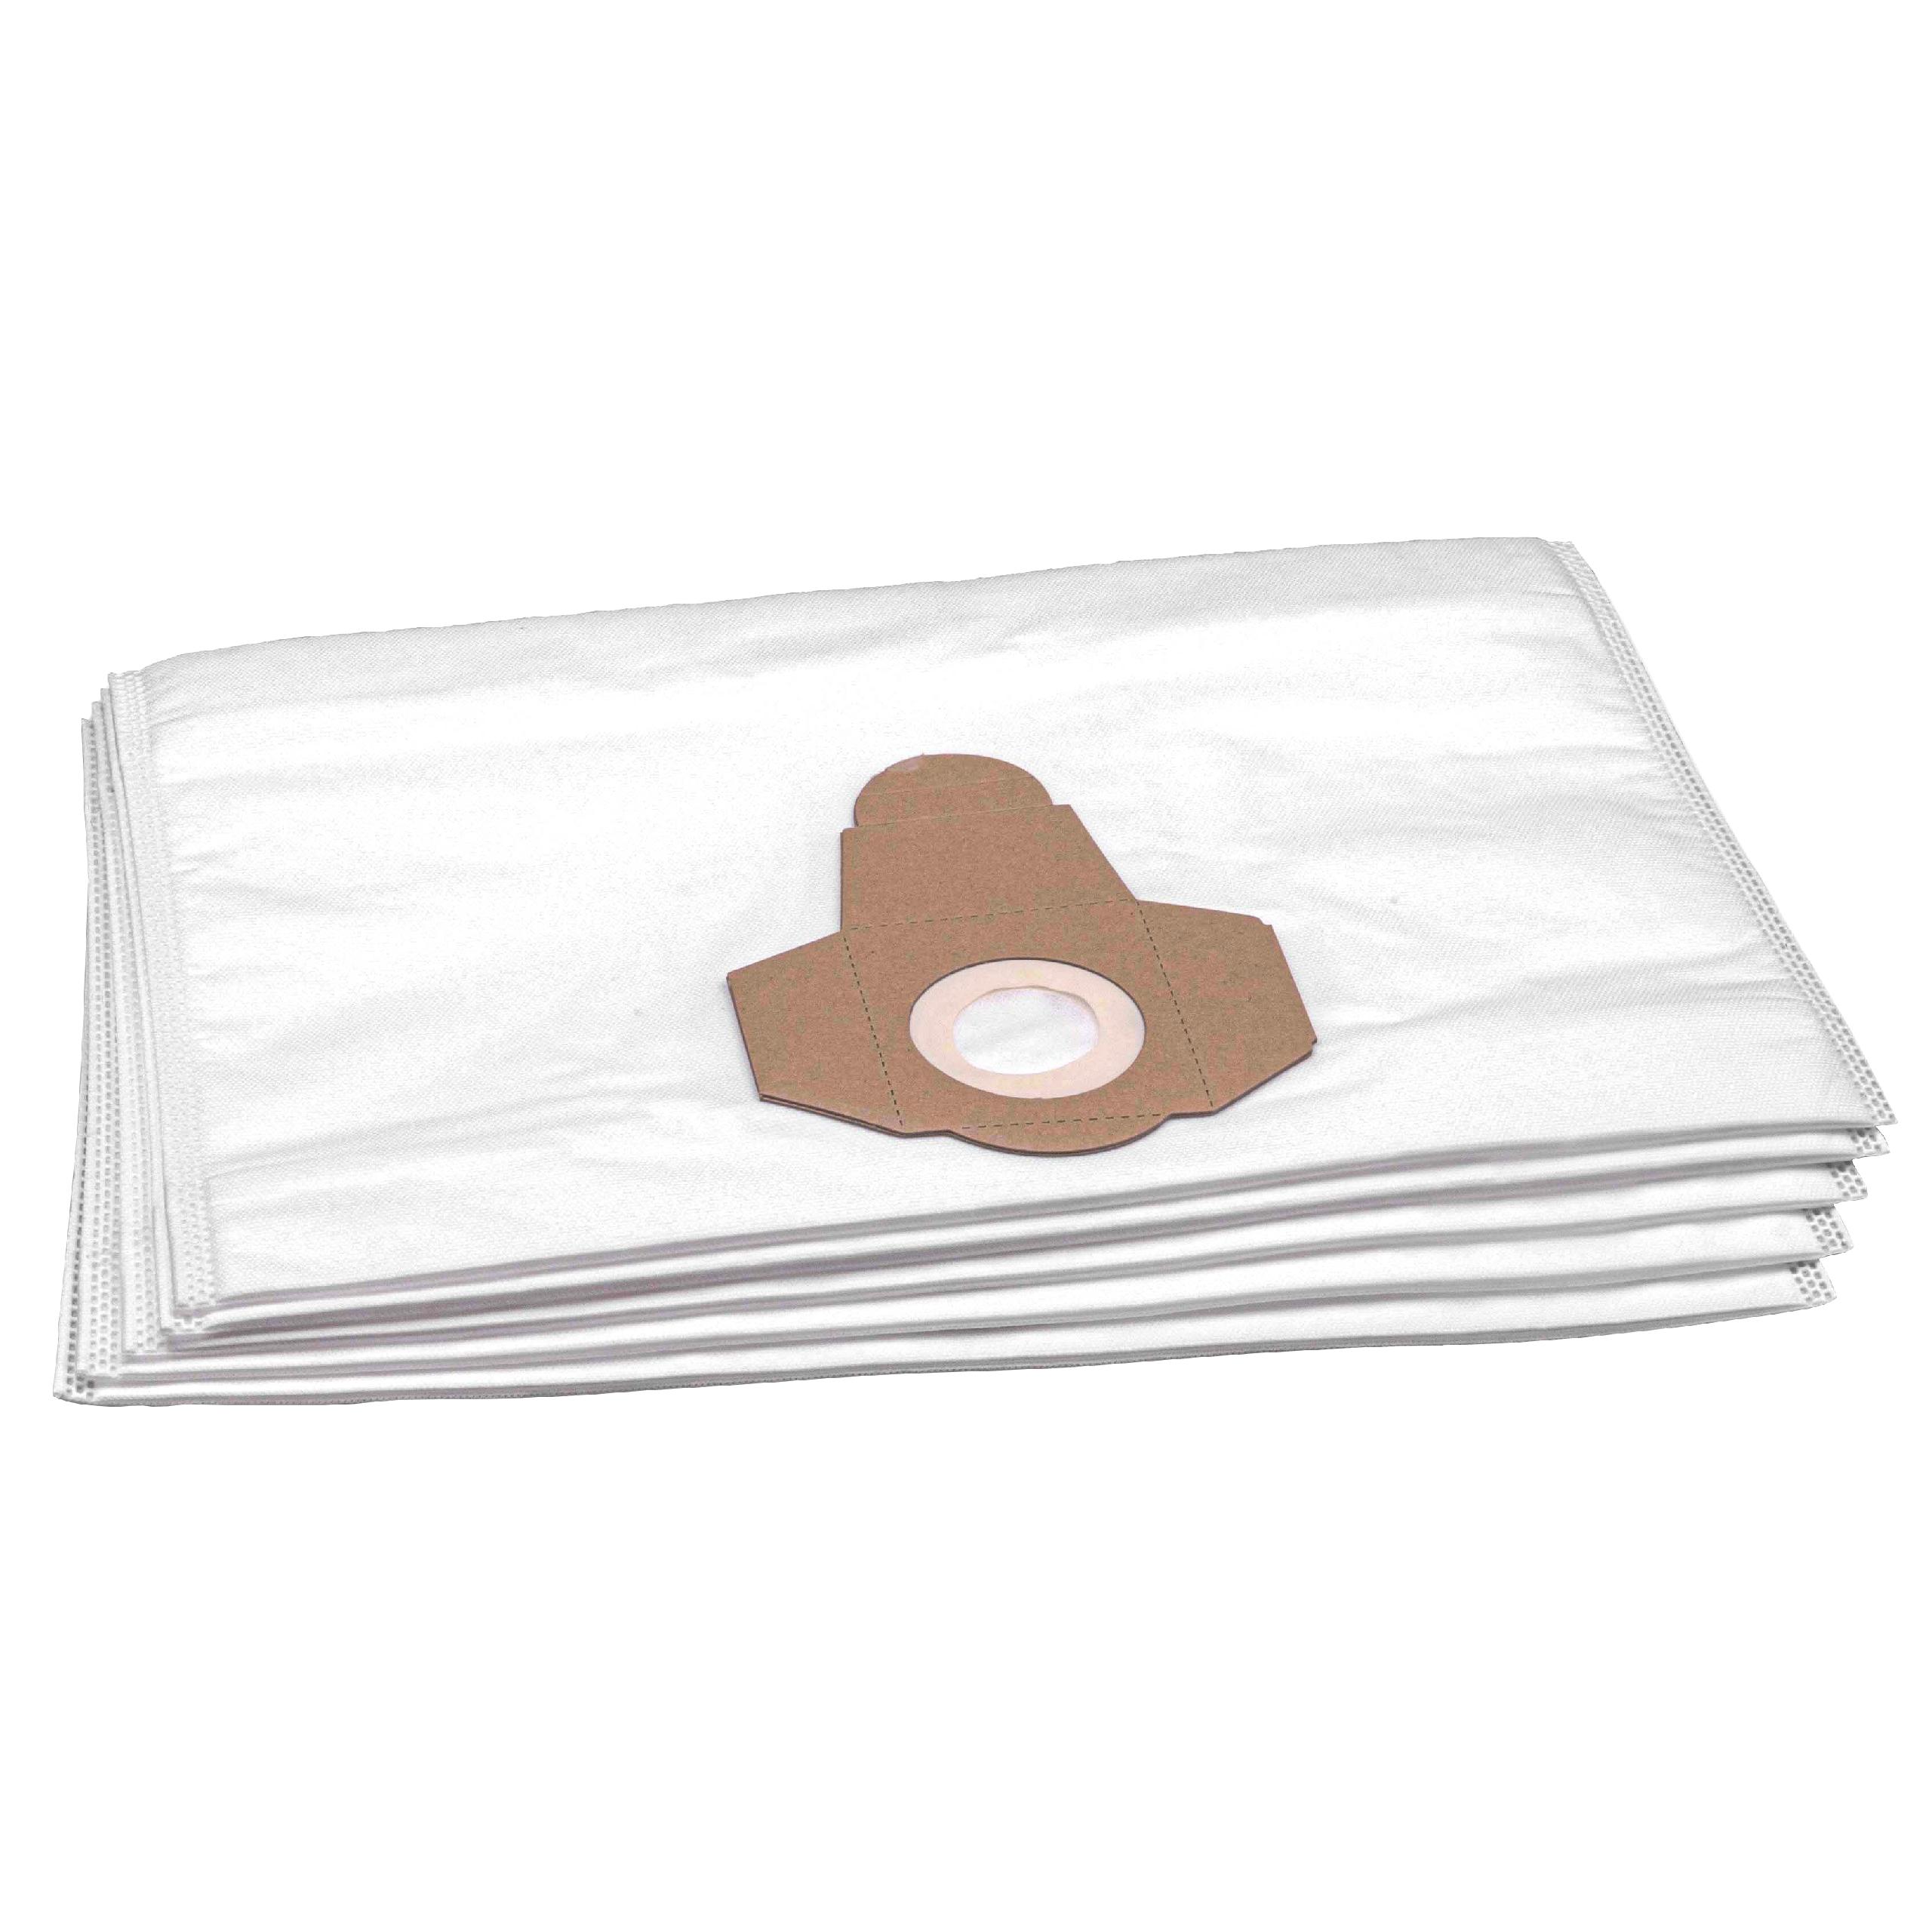 5x Vacuum Cleaner Bag replaces Siemens Typ W for Moulinex - microfleece